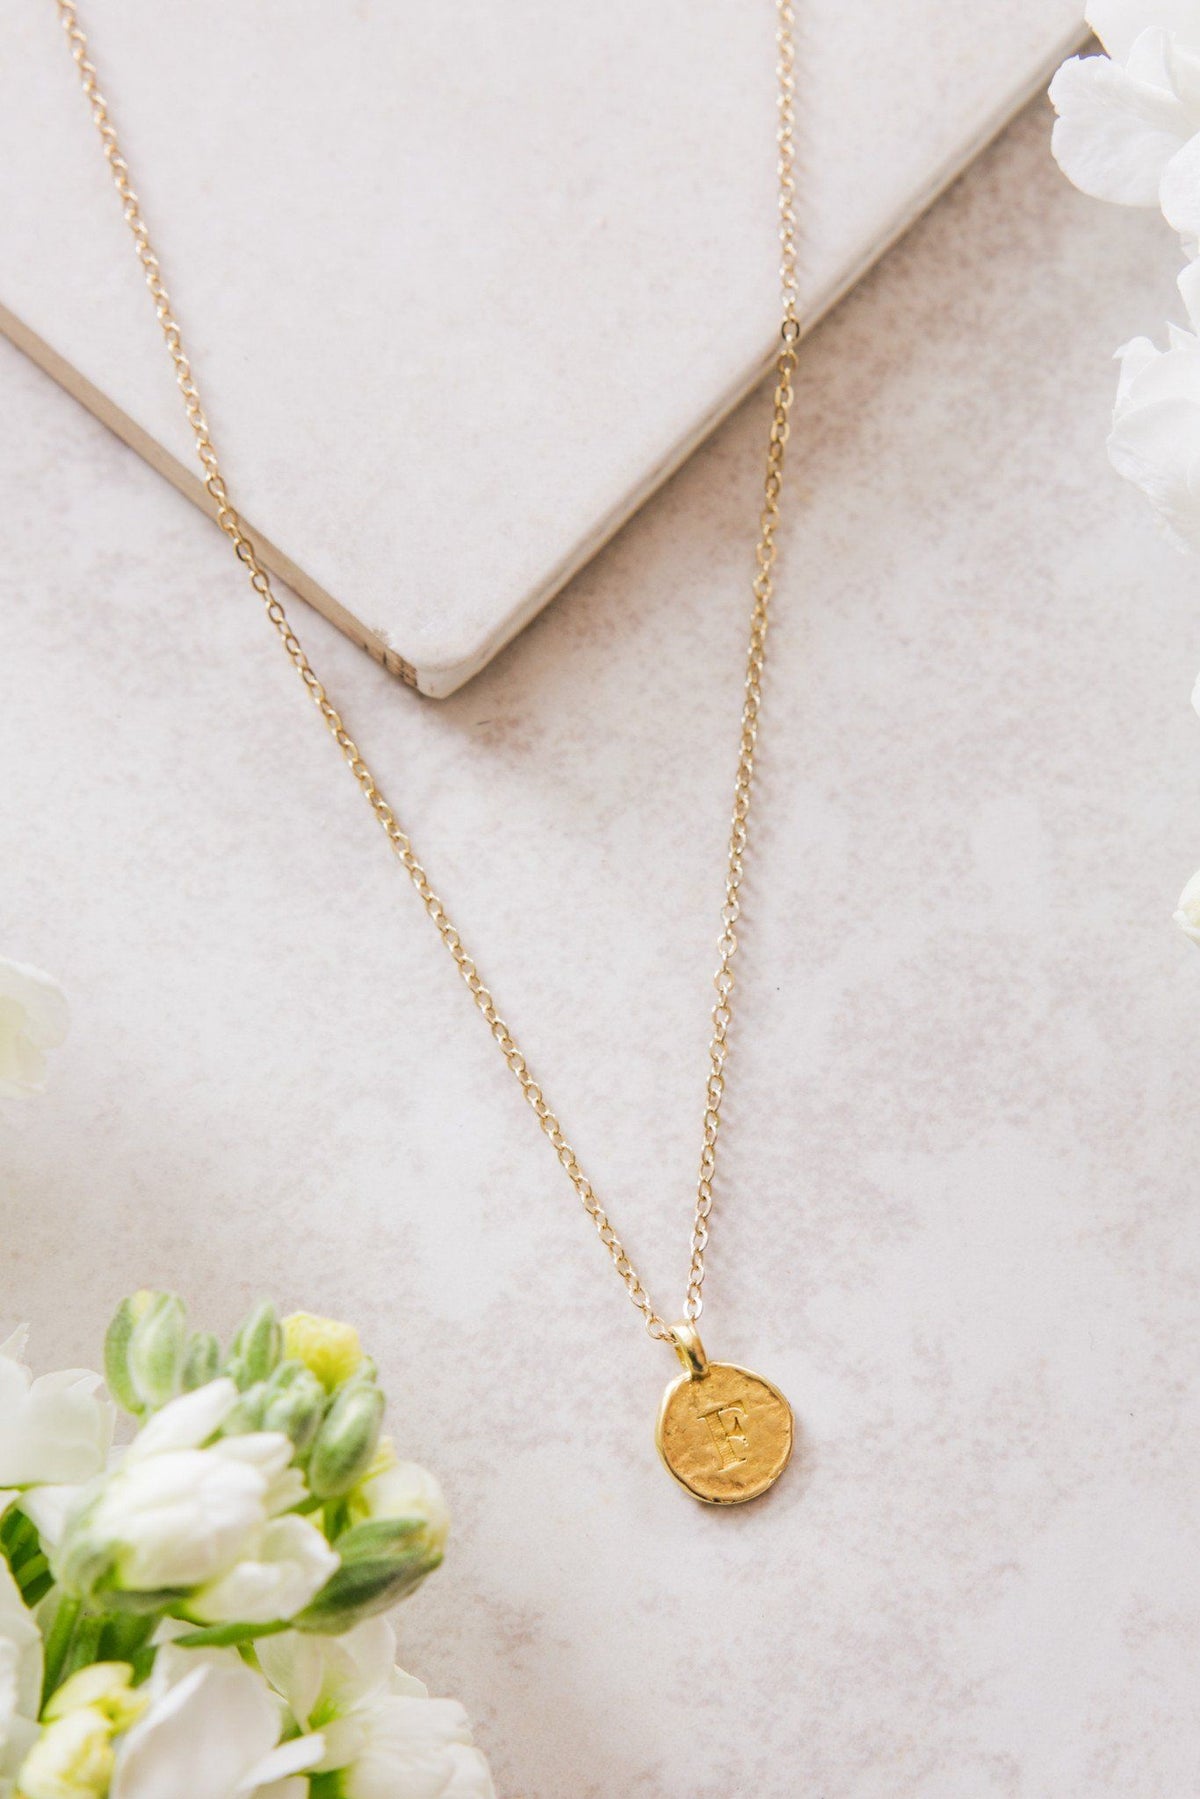 Initial Love Necklace